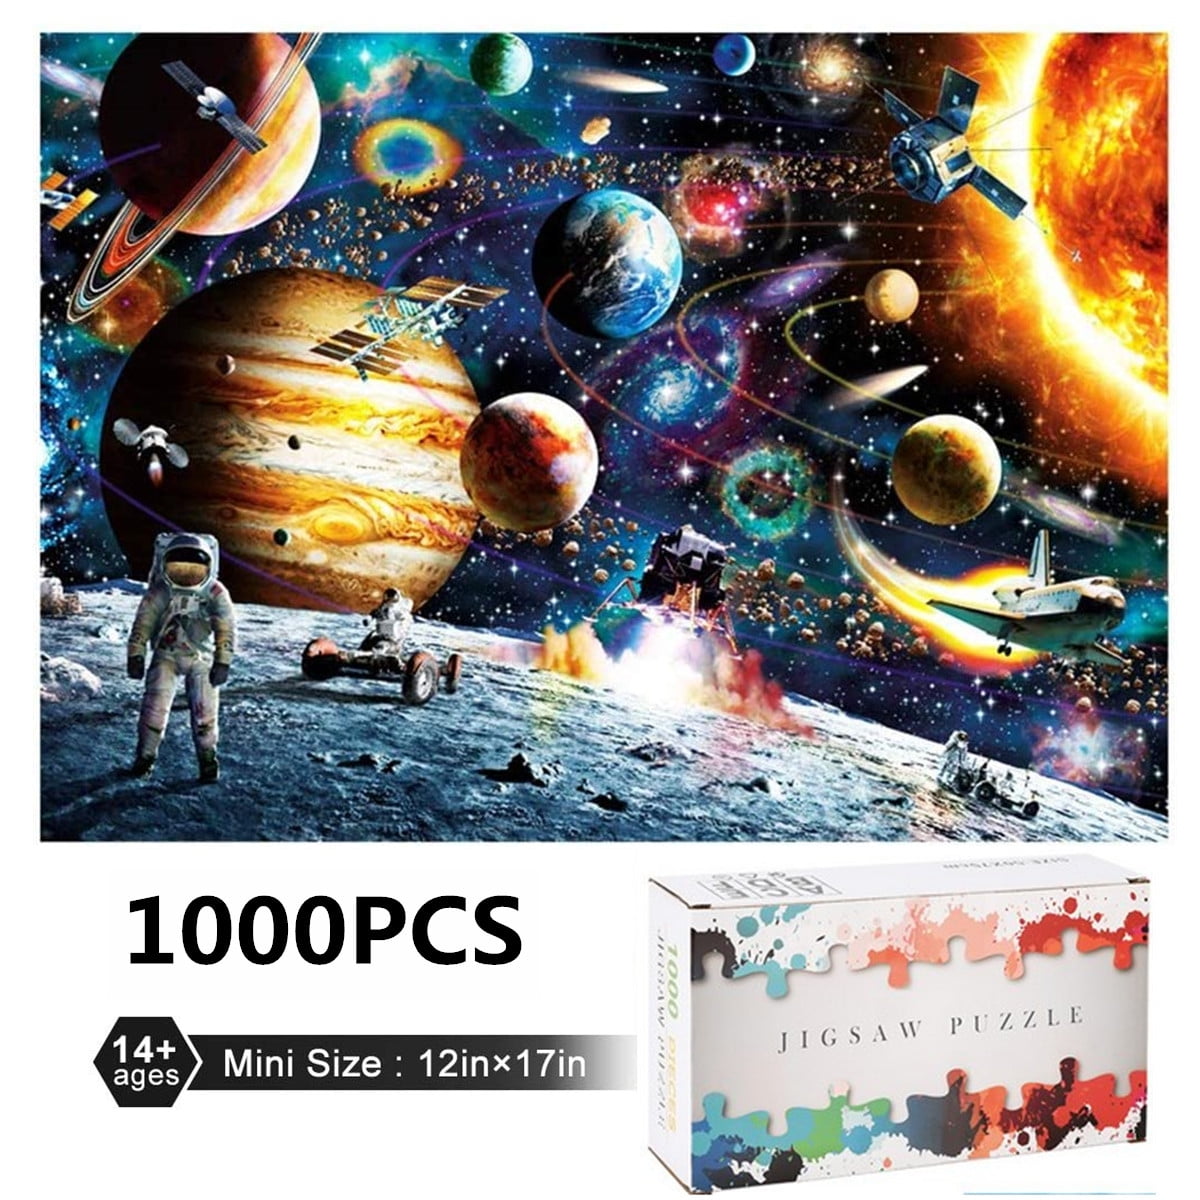 Small Town 4000 Pieces Jigsaw Puzzles Technology Means Pieces Fit Together Perfectly Jigsaw Puzzles 4000 Piece for Adult